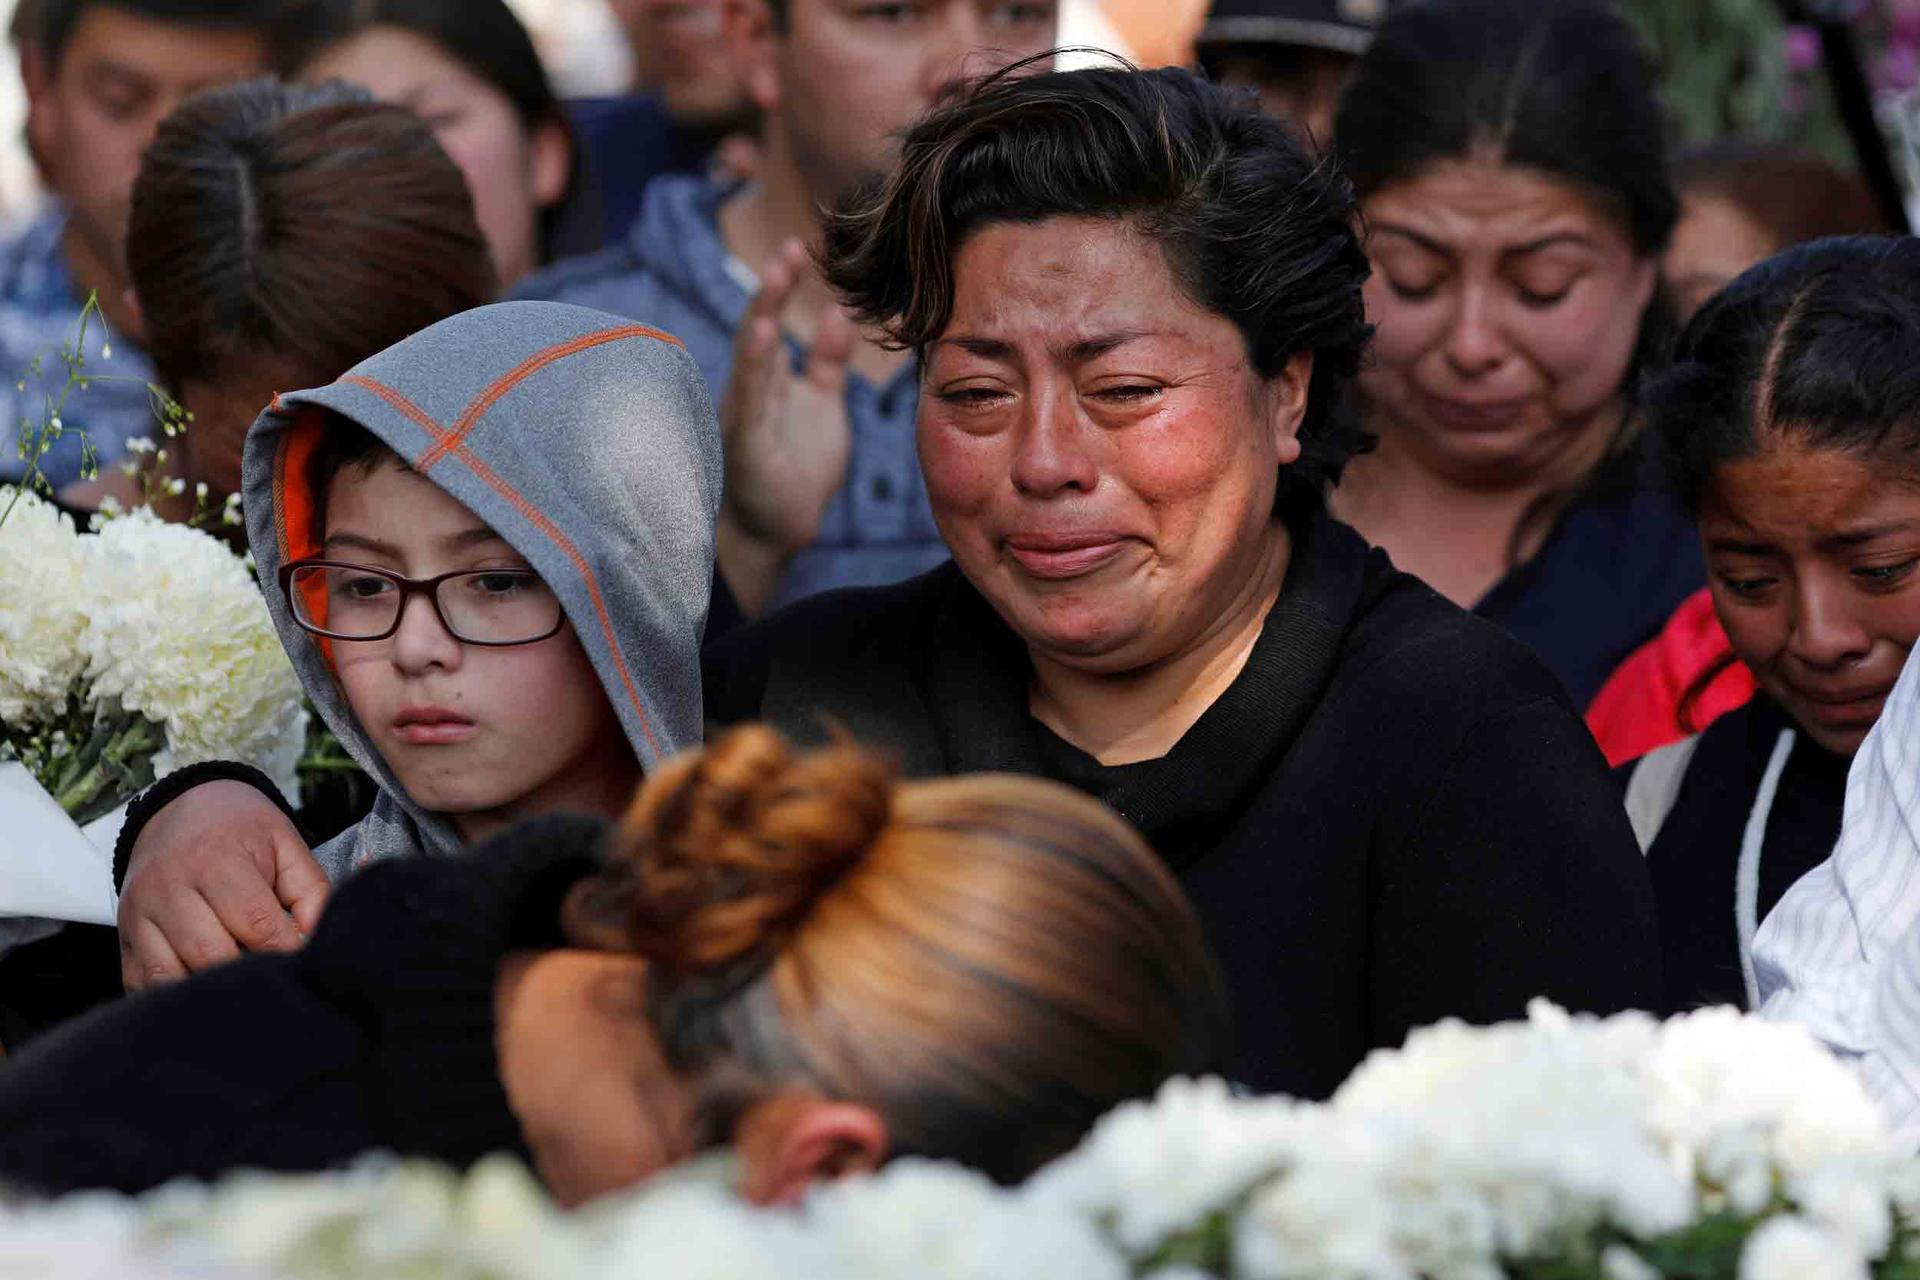 A woman cries and hold onto a young boy as a crowd of people gather for a funeral